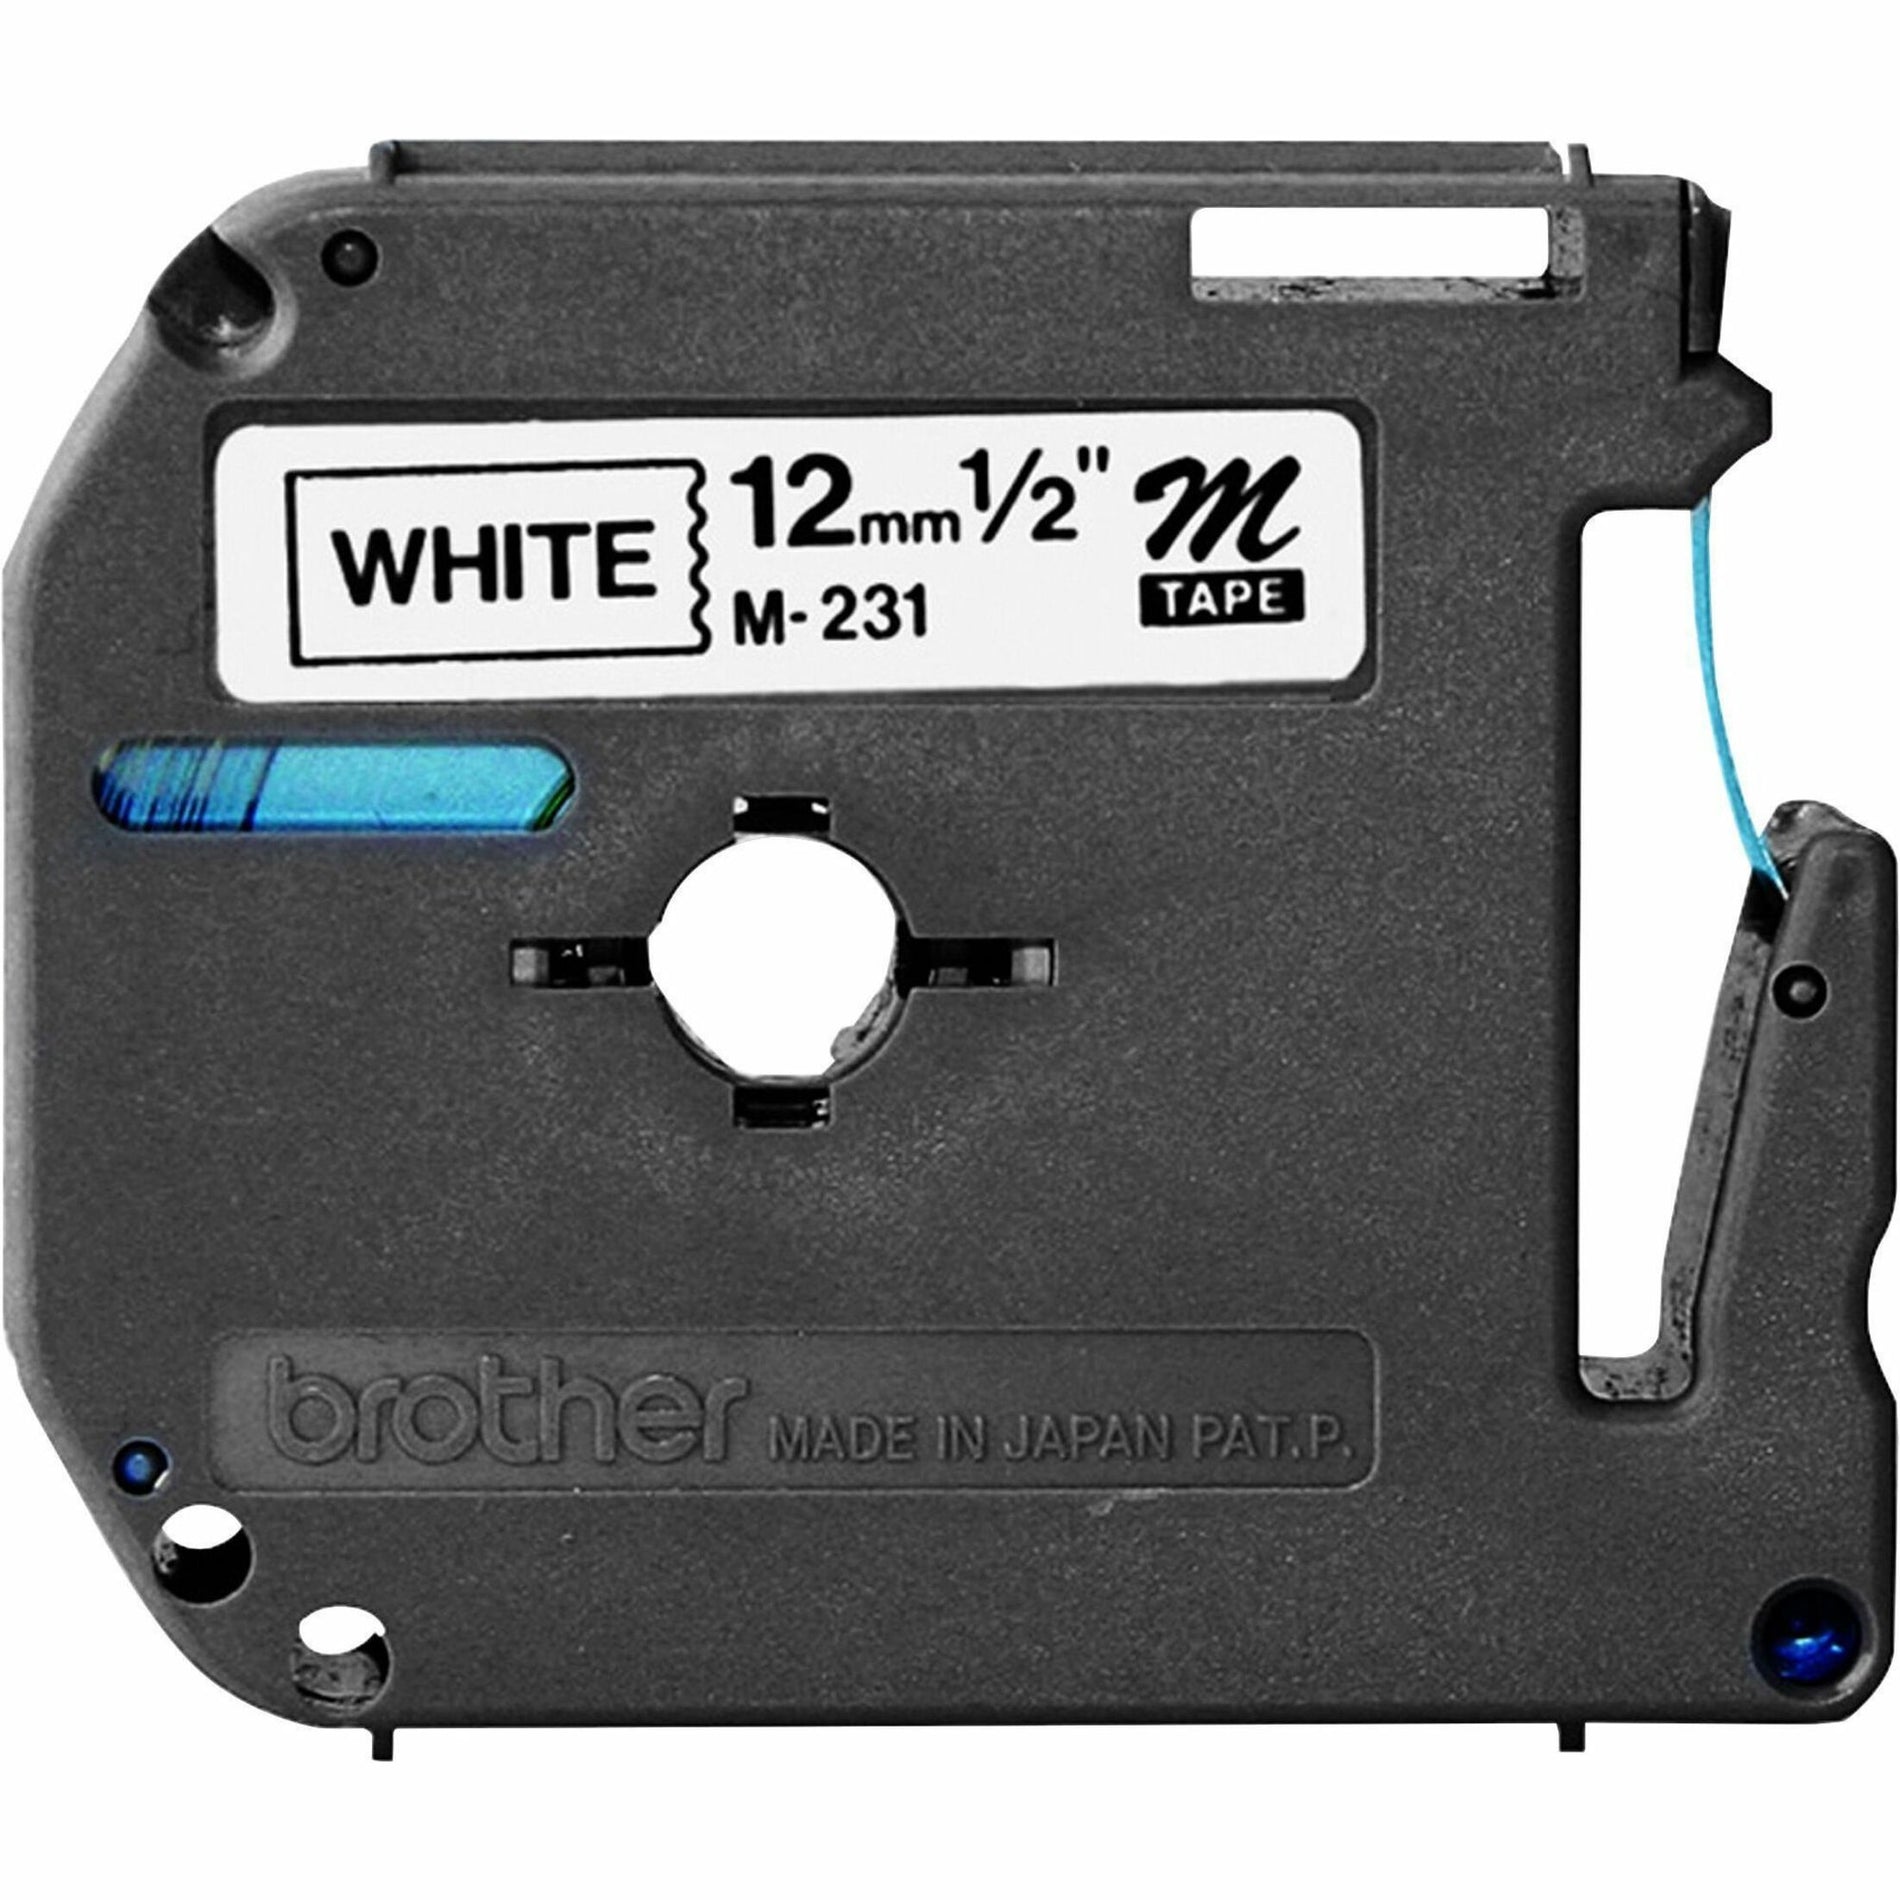 Brother M231 P-touch Nonlaminated Label Tape, 1/2" Size, Black/White